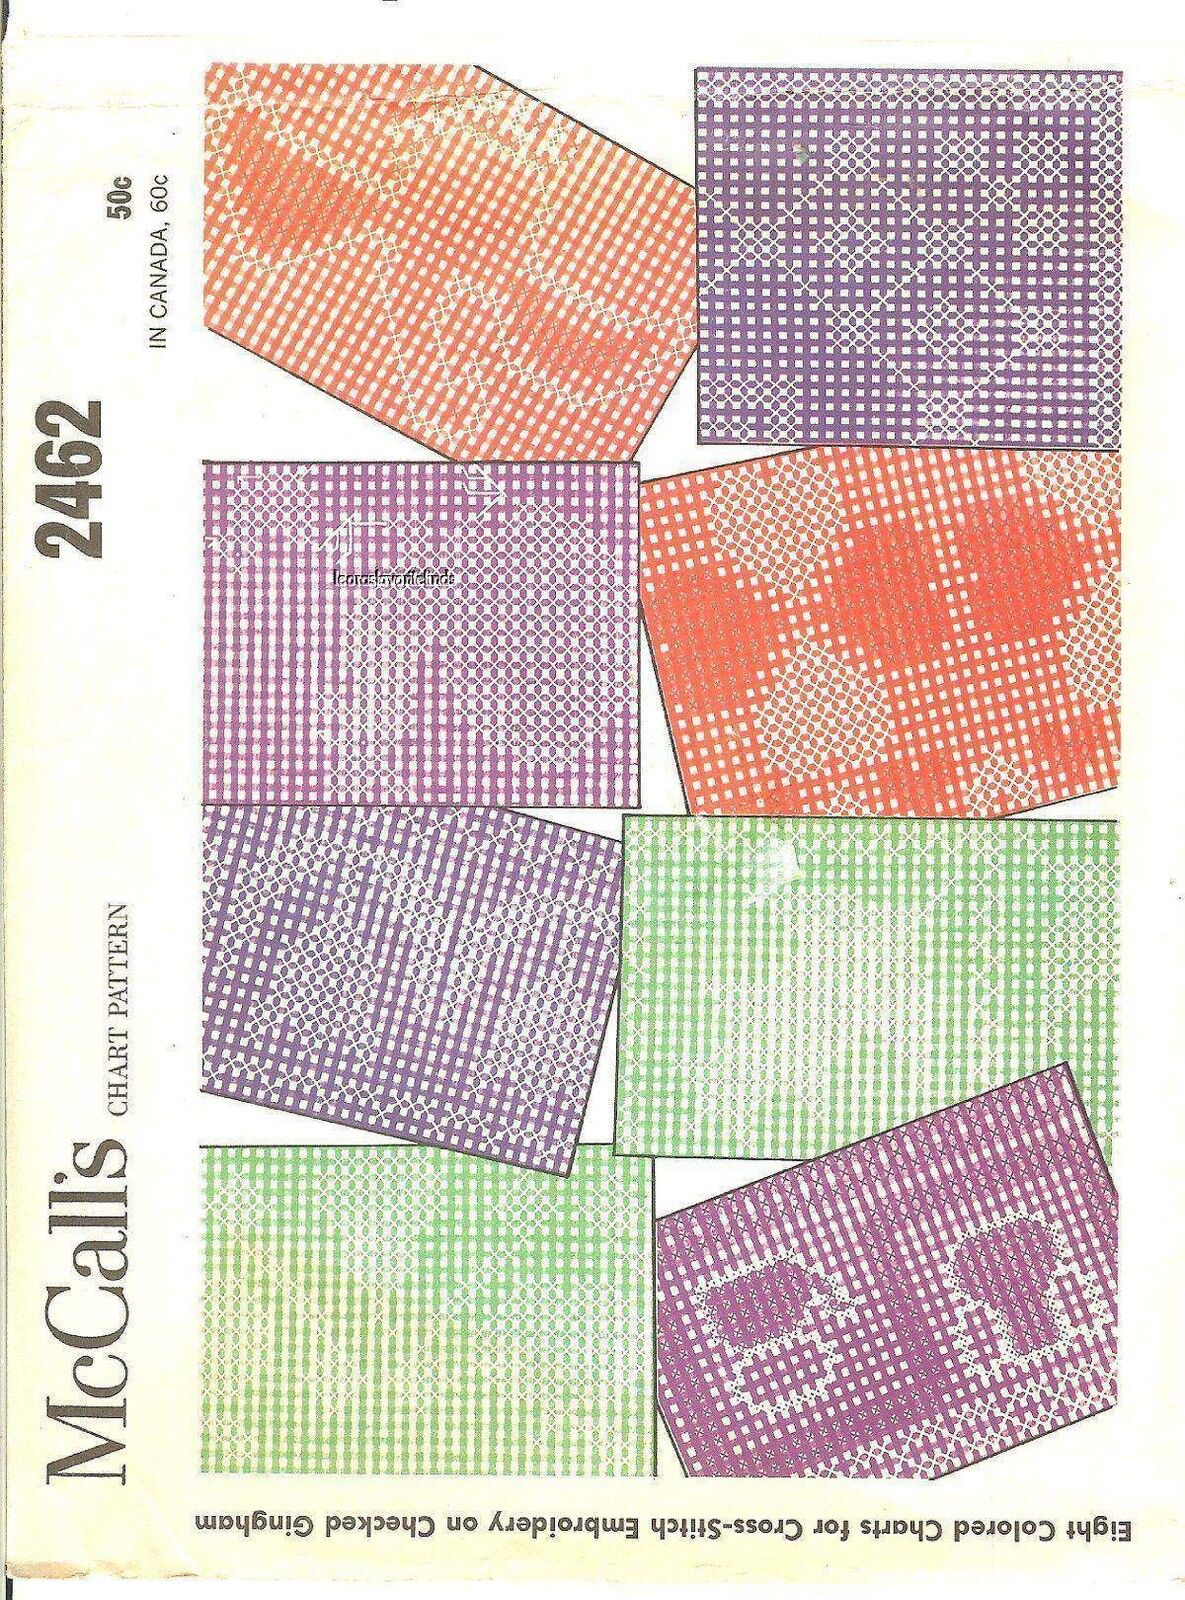 McCall\'s 2462 Vintage 1960s 8 Charts for Cross-Stitch Embroidery Border Designs